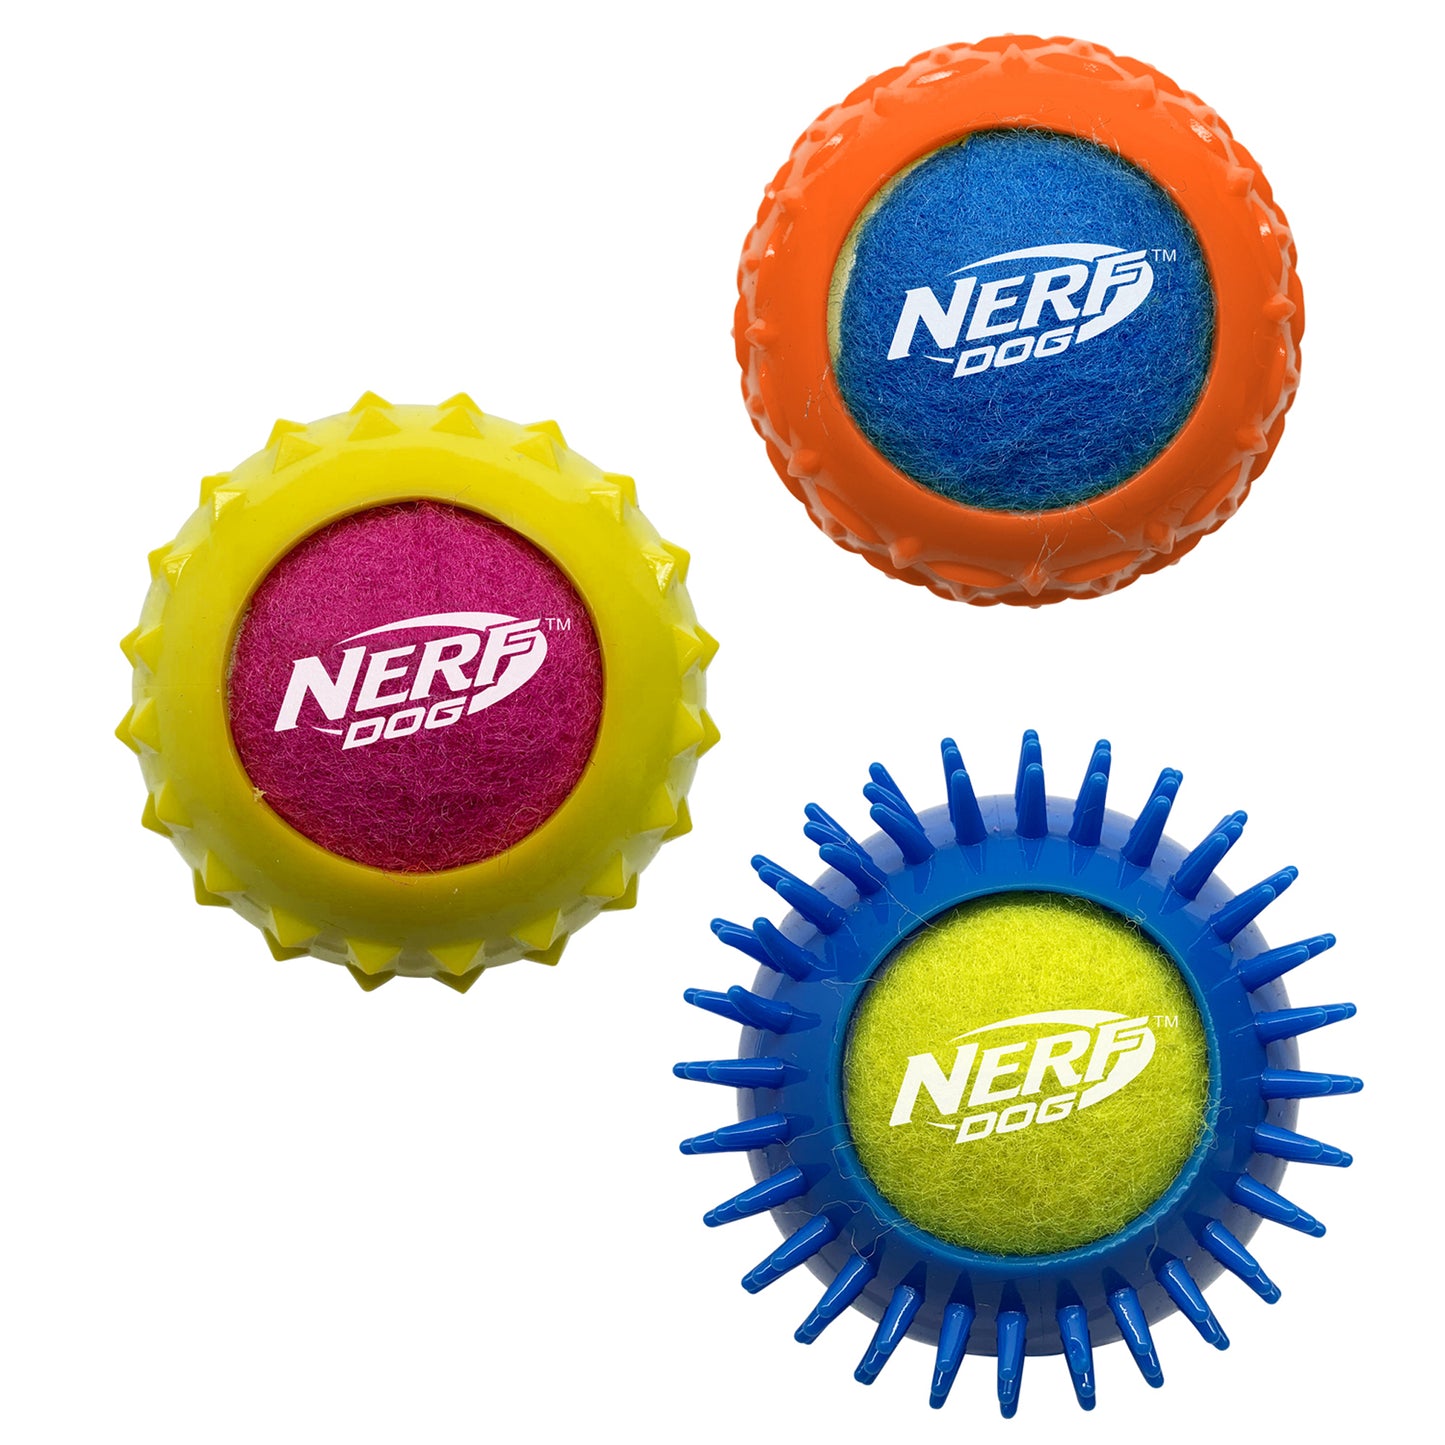 Nerf Dog Squeak Tennis Armour - 3 Pack  Dog Toys  | PetMax Canada